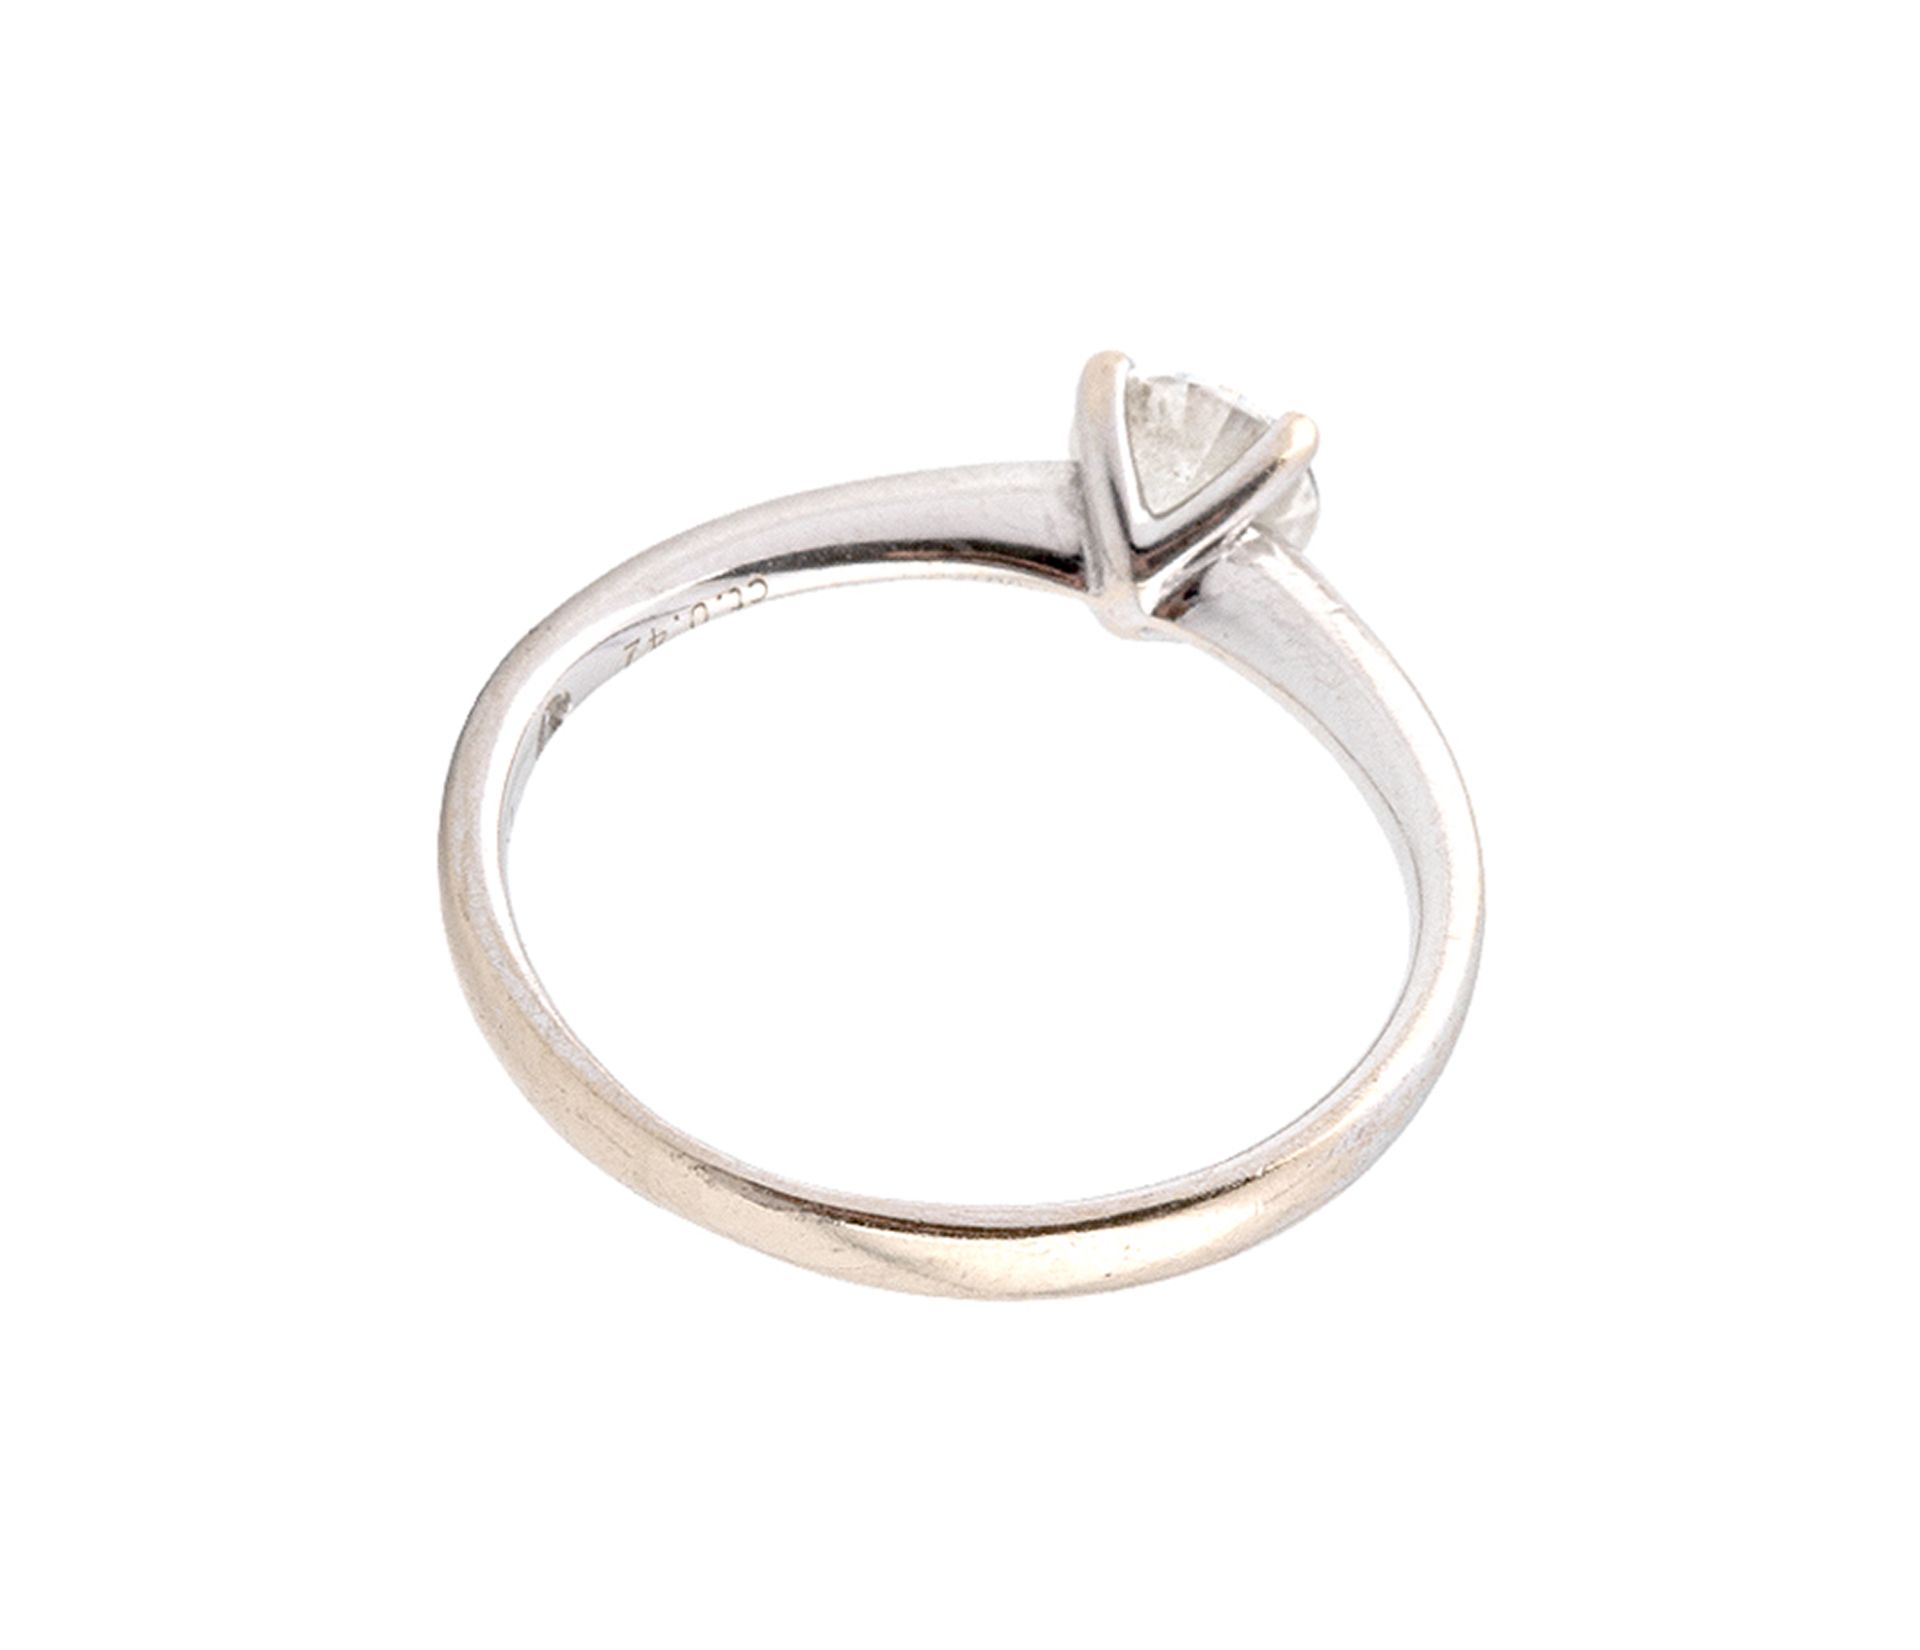 Solitaire ring in 18k white gold from the Rabat firm with a 0.42 ct central cut diamond - Image 3 of 3